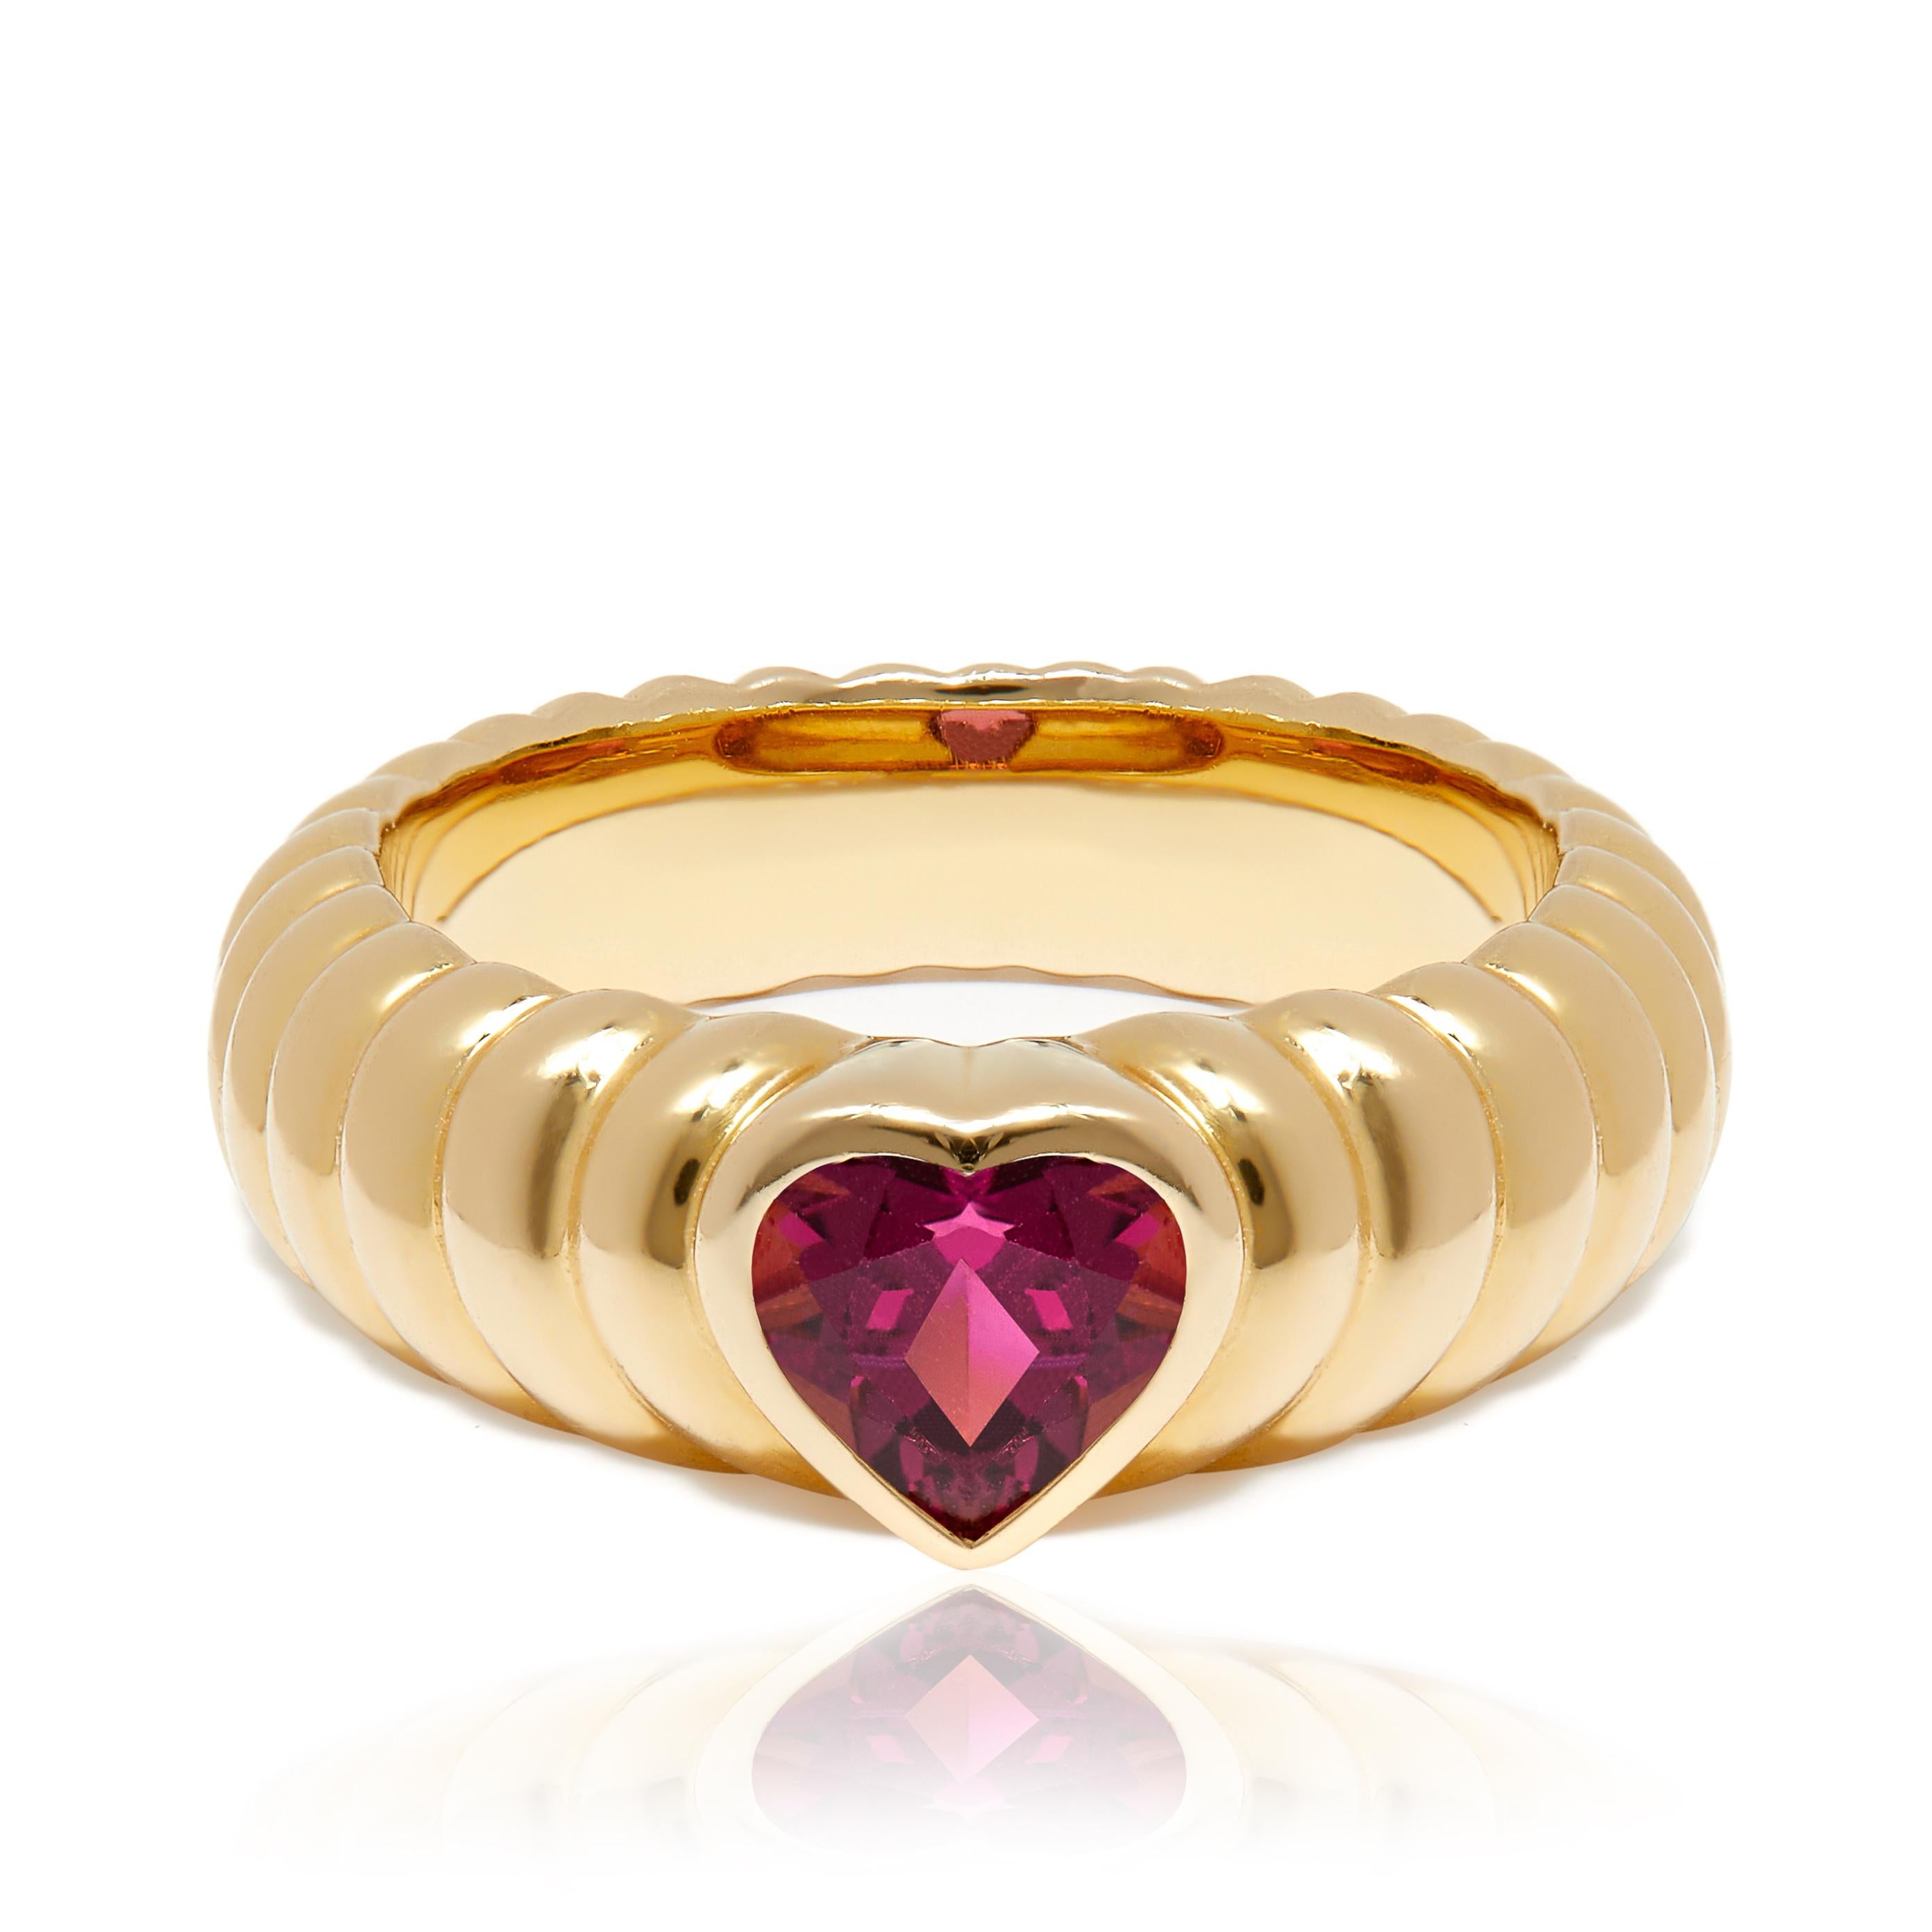 A sweet Tiffany & Co. signed heart shaped tourmaline ring. This ring makes a perfect pinky ring, thanks to its size. The perfect everyday ring and makes a beautiful gift for a loved one. 